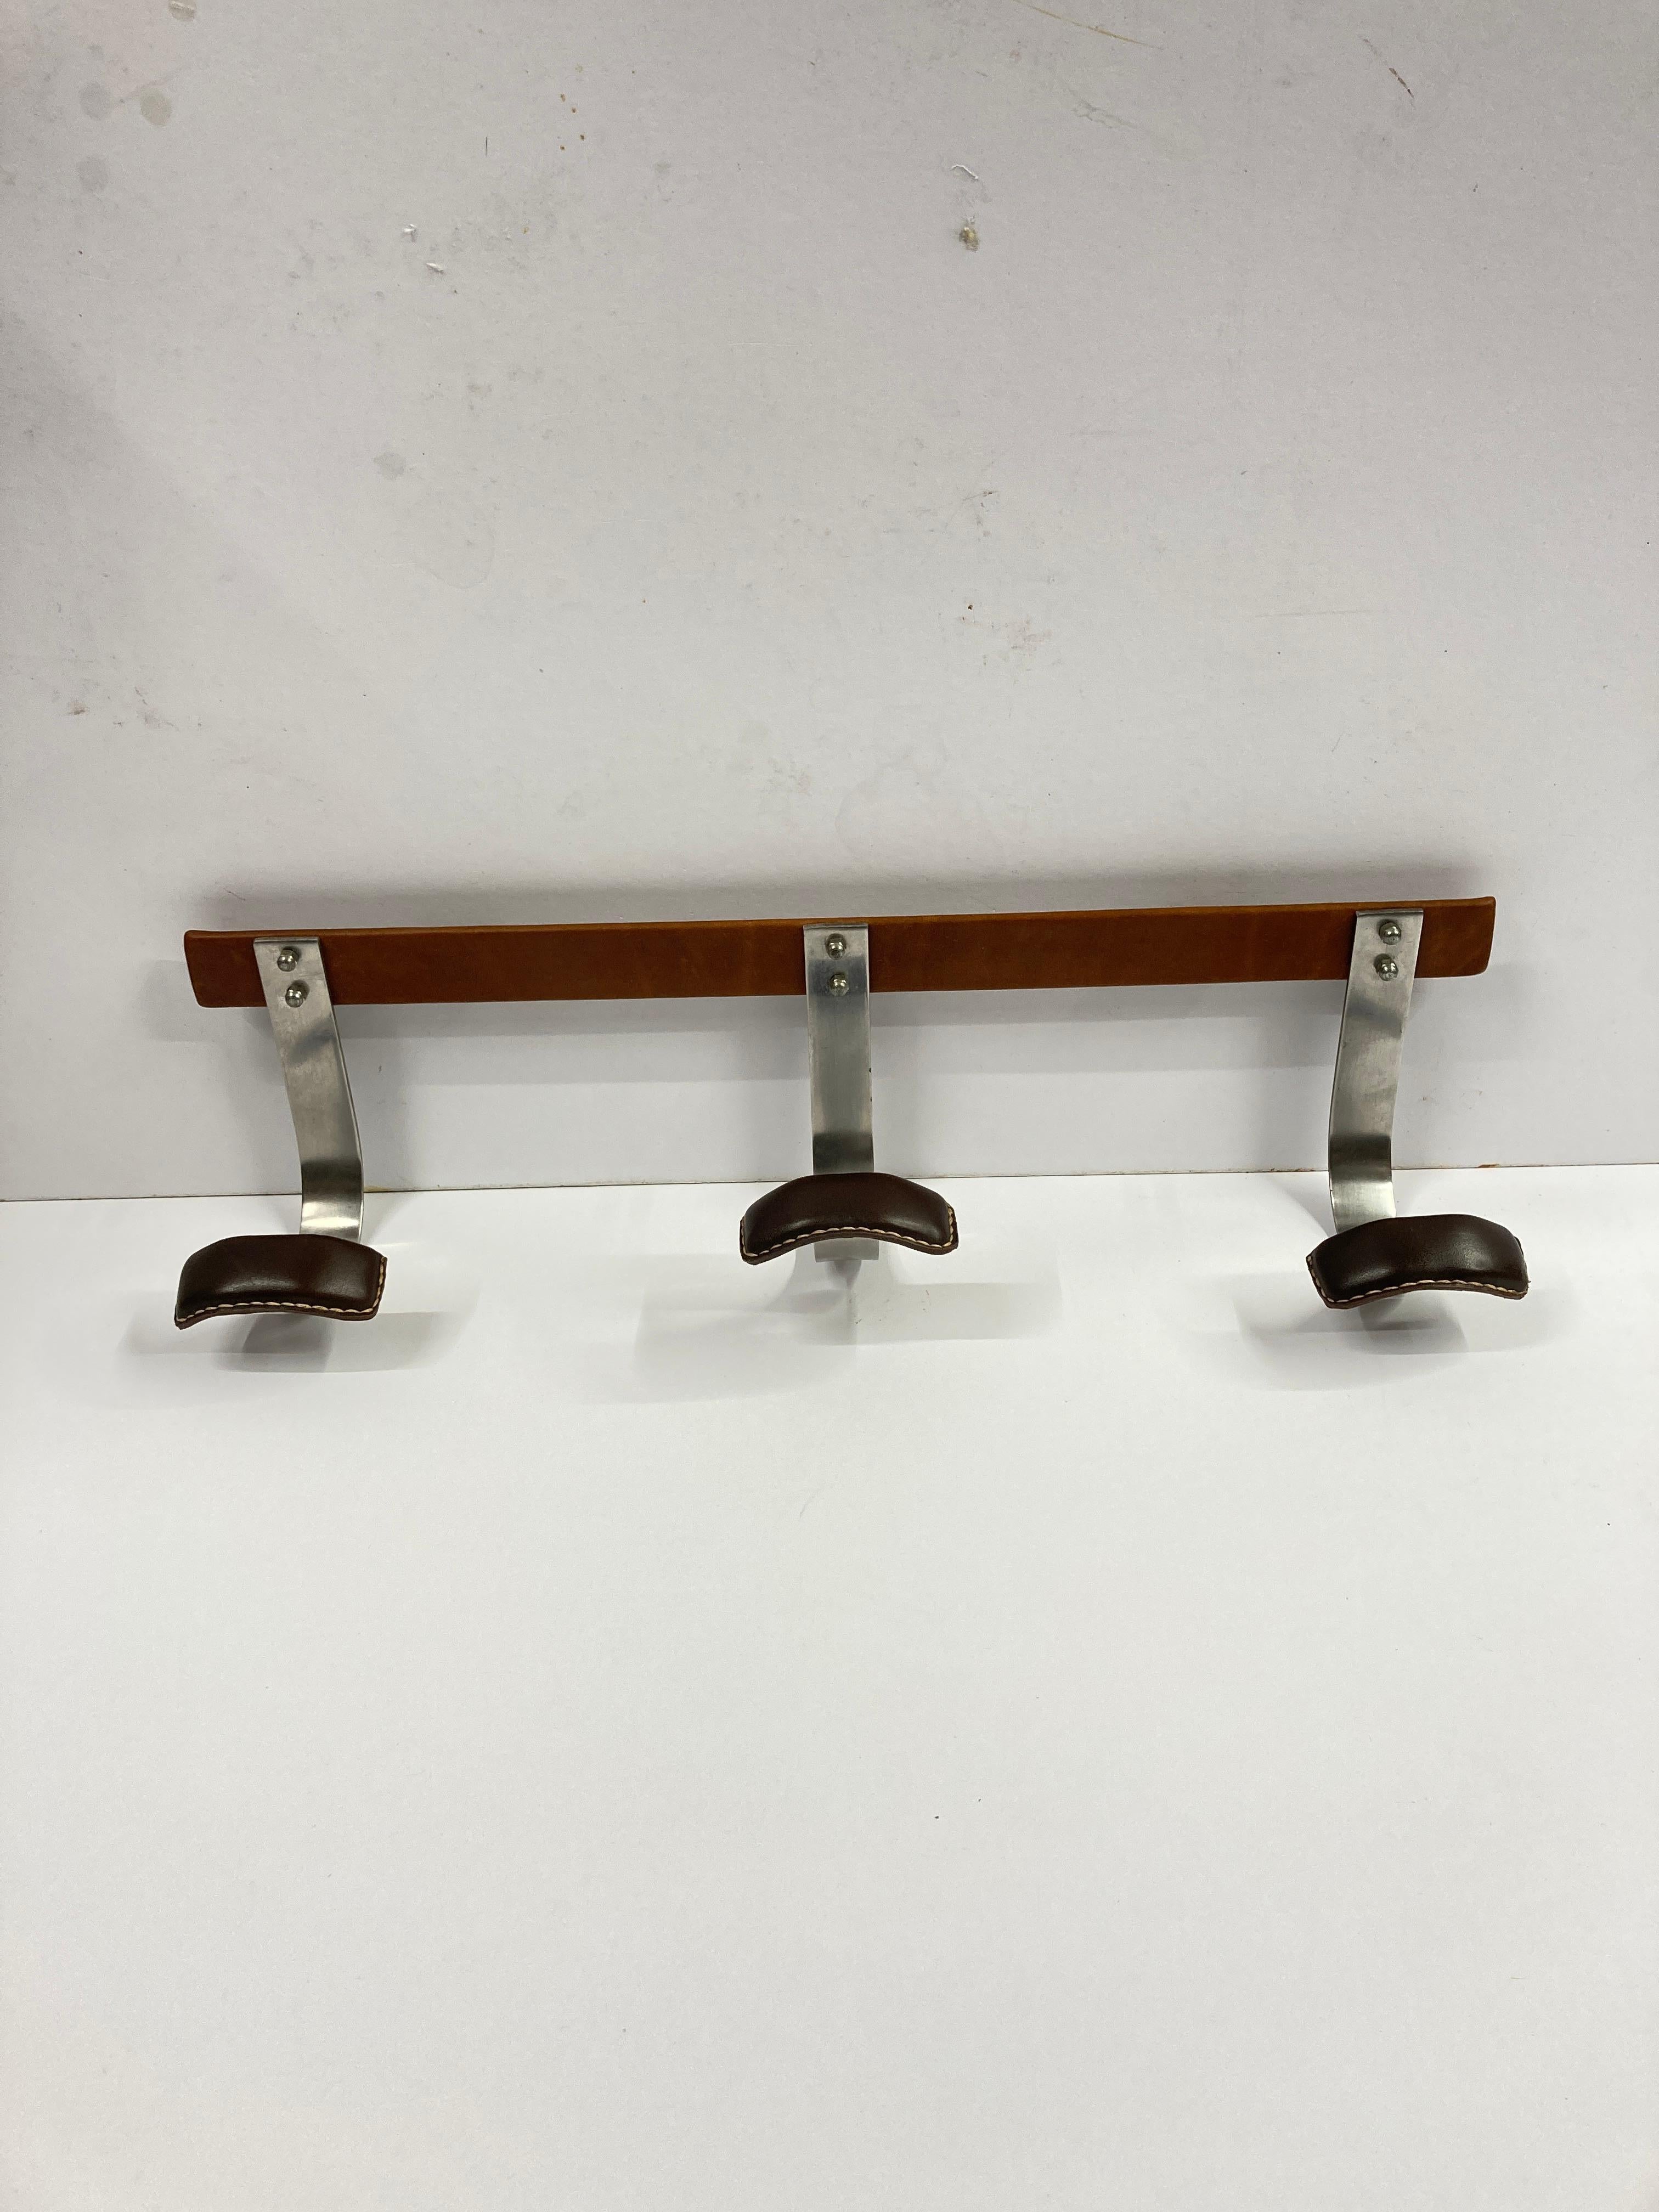 1950's Stitched Leather coat rack von Jacques Adnet im Zustand „Gut“ im Angebot in Bois-Colombes, FR